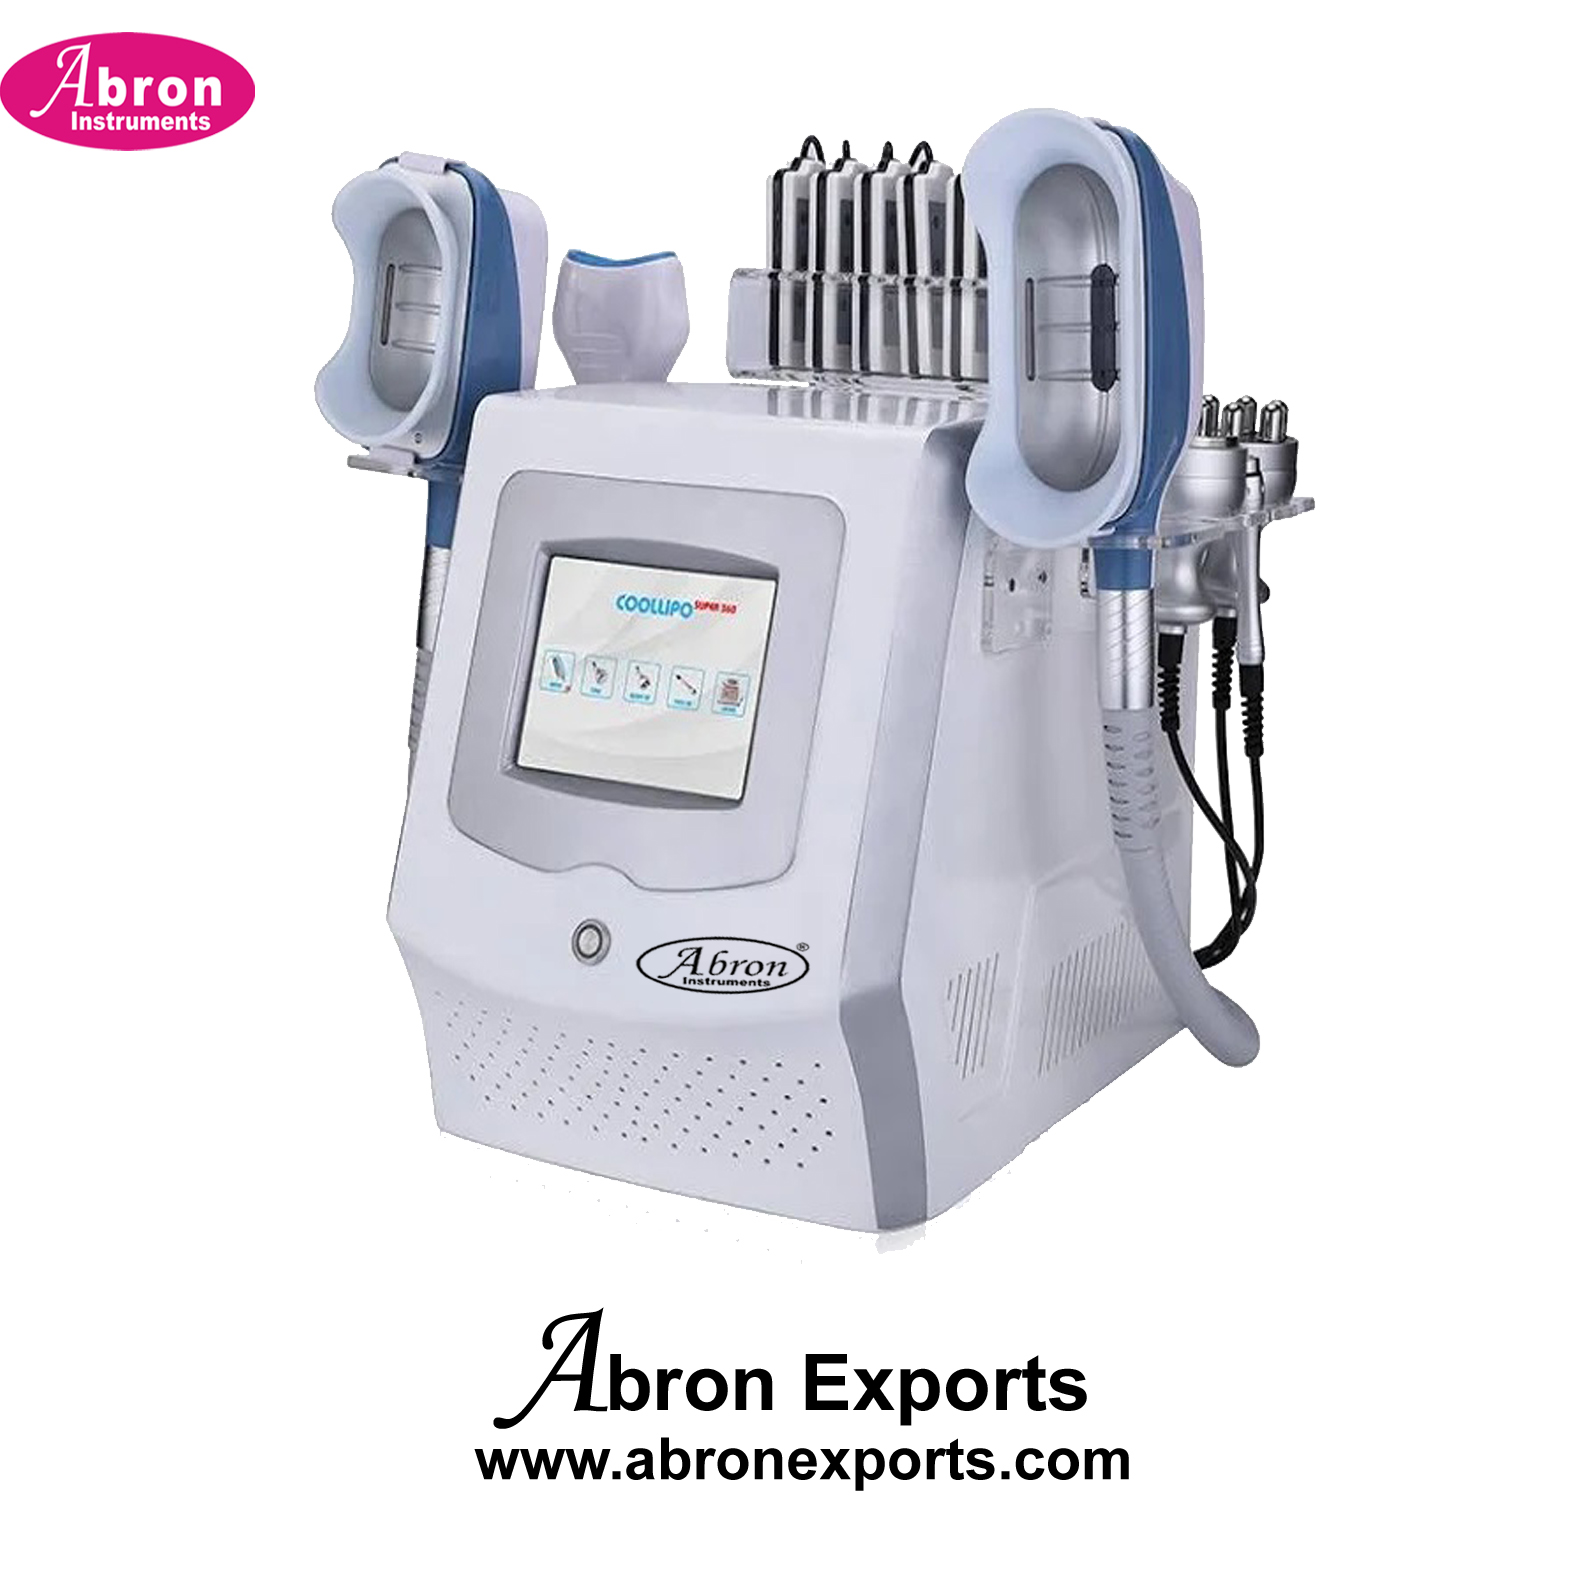 Physiotherapy Clinic Cryoflow Cryotherapy Chamber Weight Loss Cellulite Removel Cryopolisis both Unit Abron ABM-1610CR 